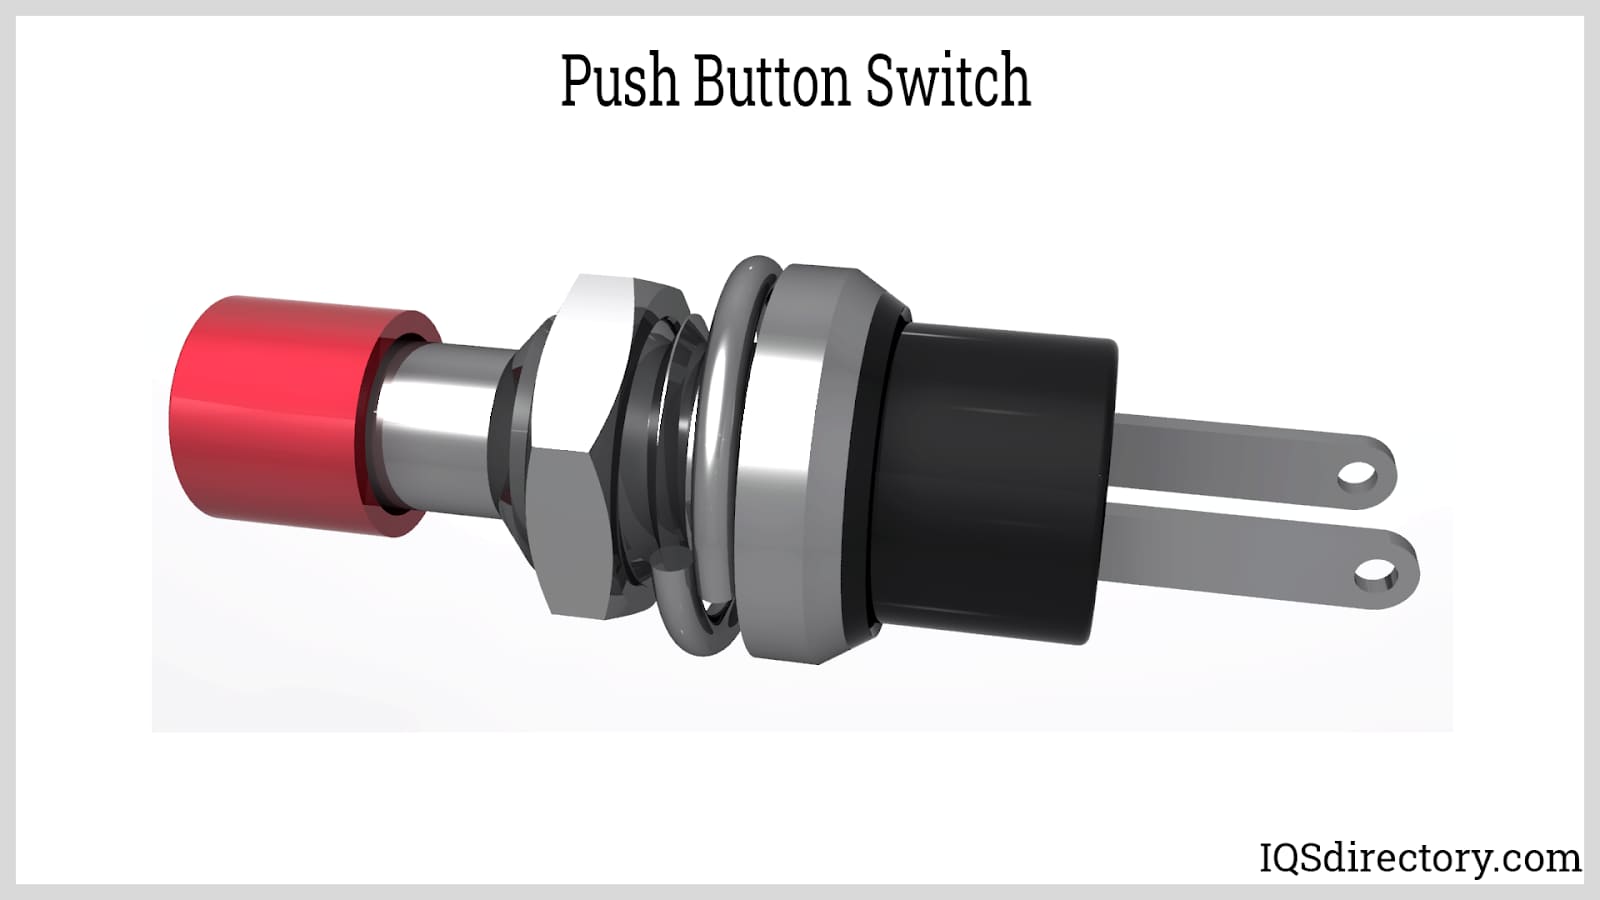 https://www.iqsdirectory.com/articles/electric-switch/push-button-switches/push-button-switch-3.jpg